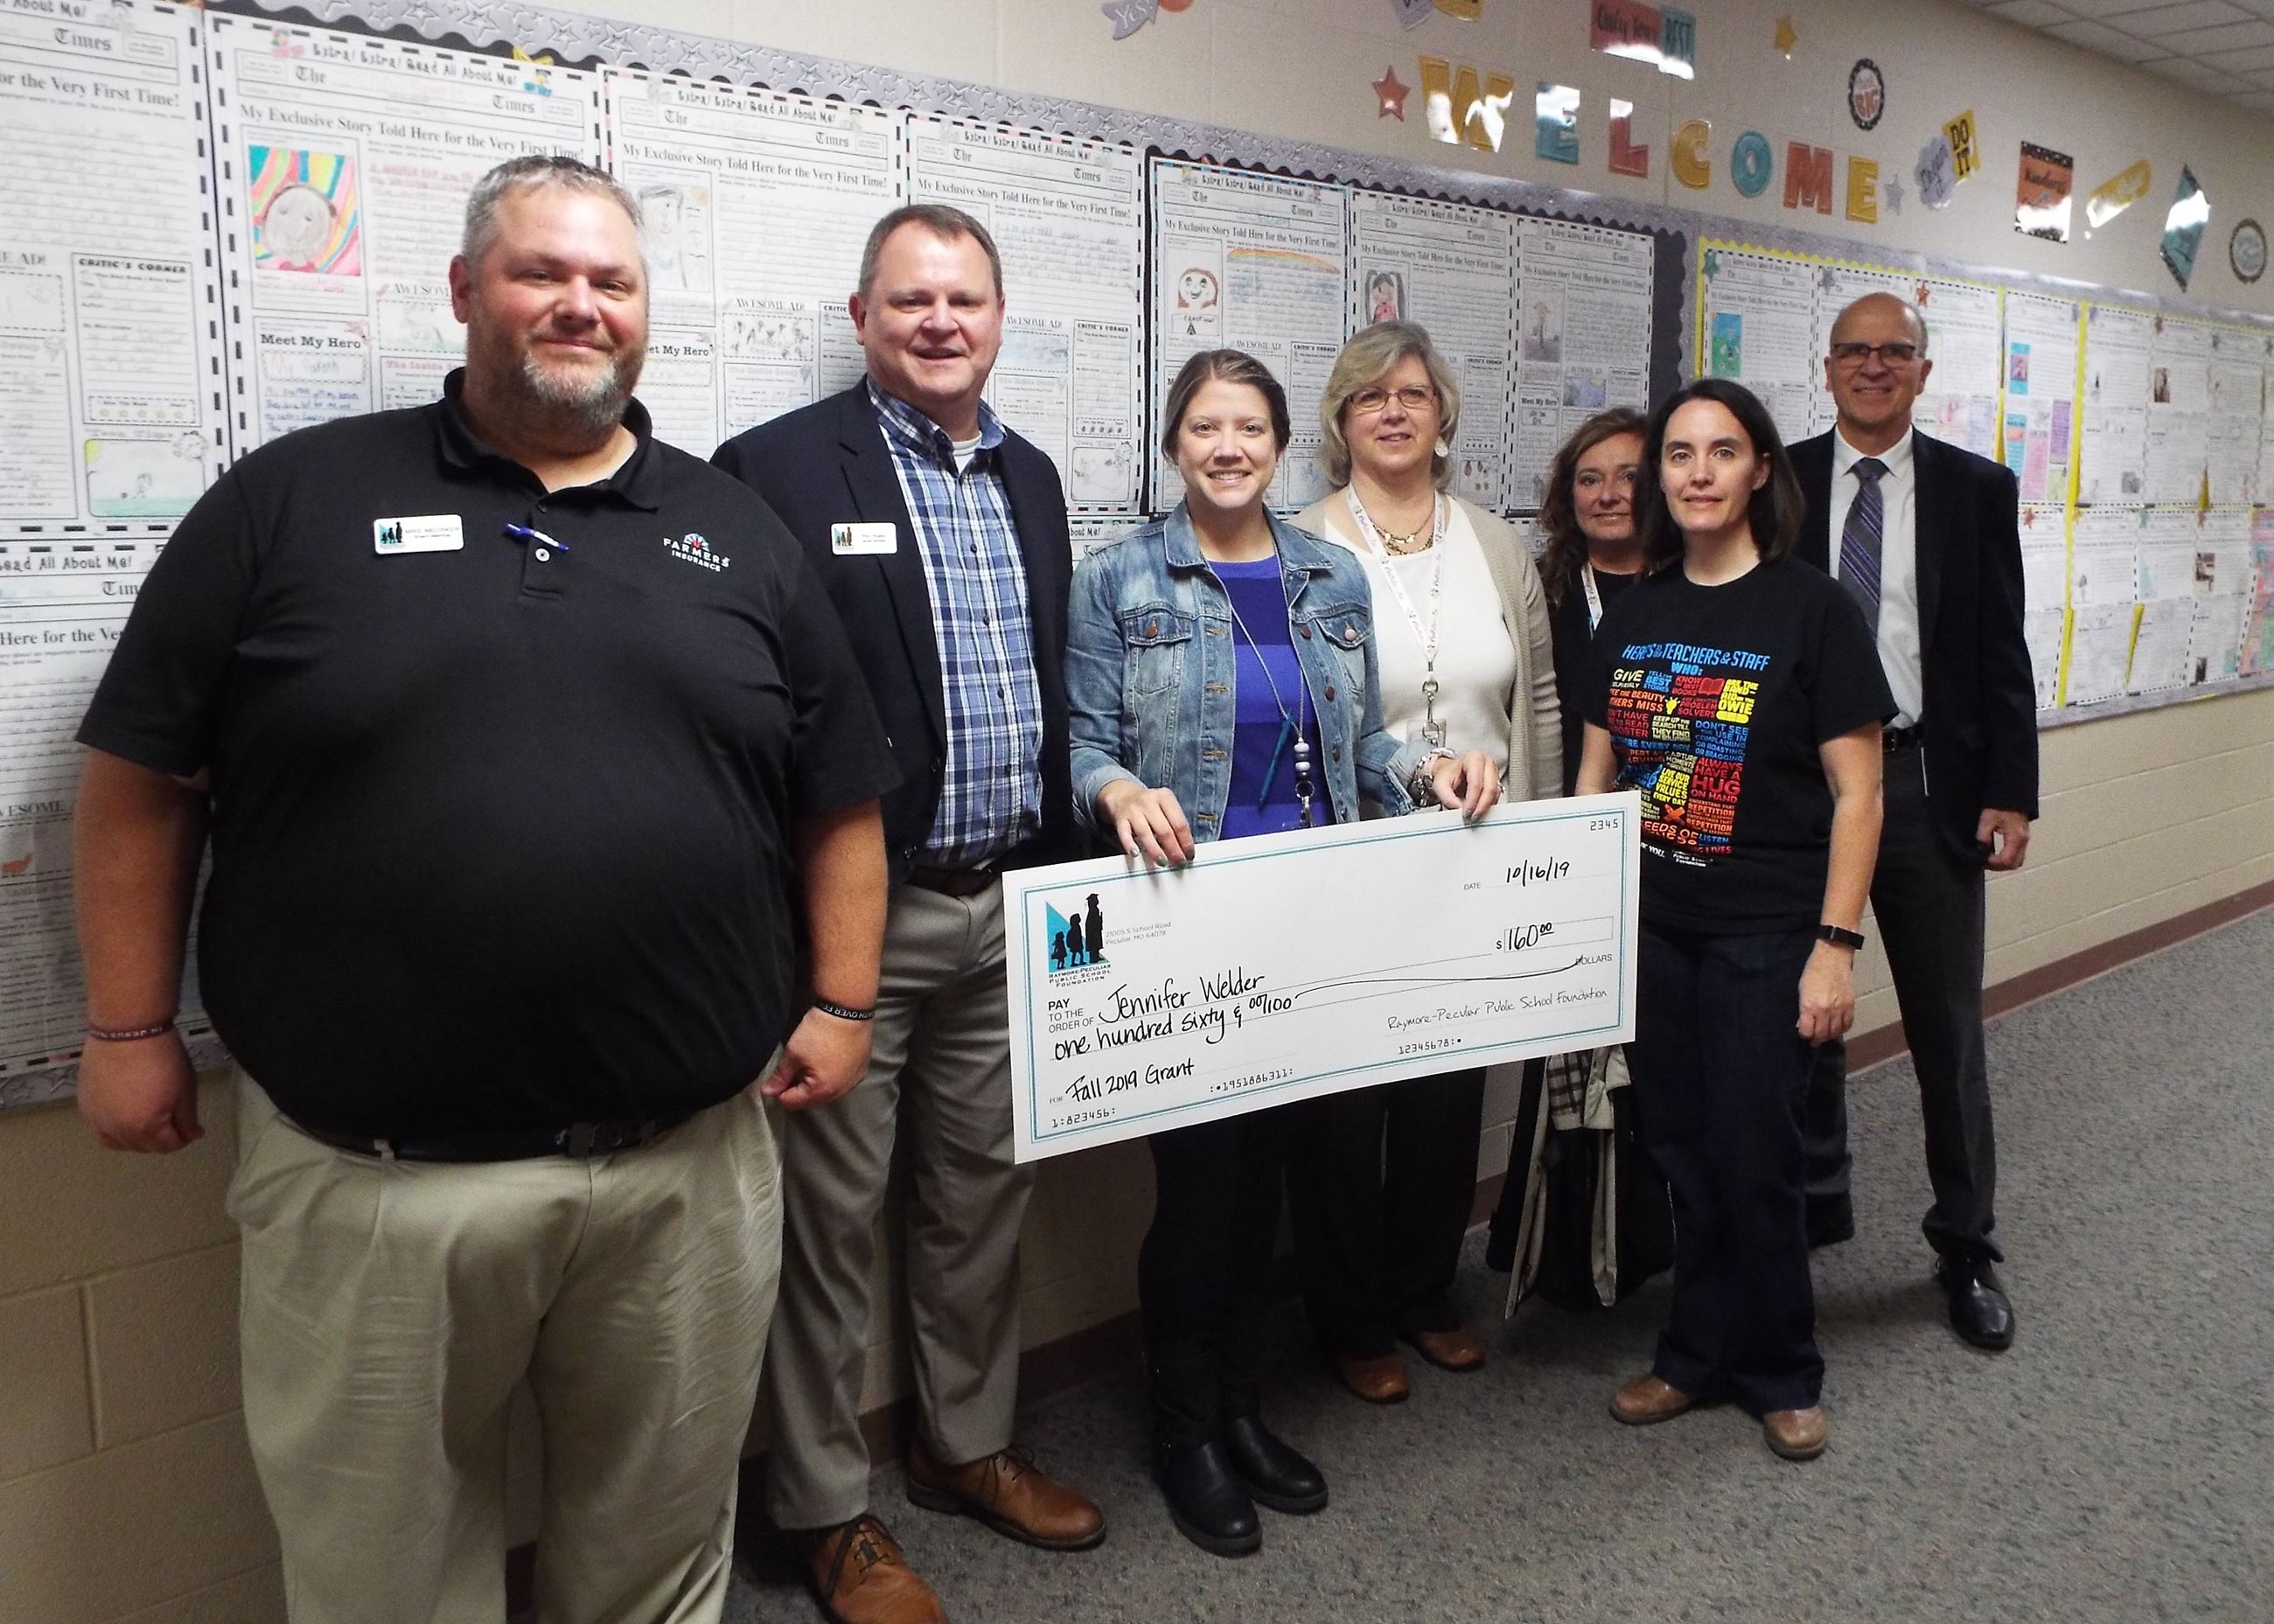 Stonegate Elementary Speech Teacher Jennifer Welder received a grant of $160 to purchase extra books for the Speech/Language Therapy Room Library and supplies for monthly activities.